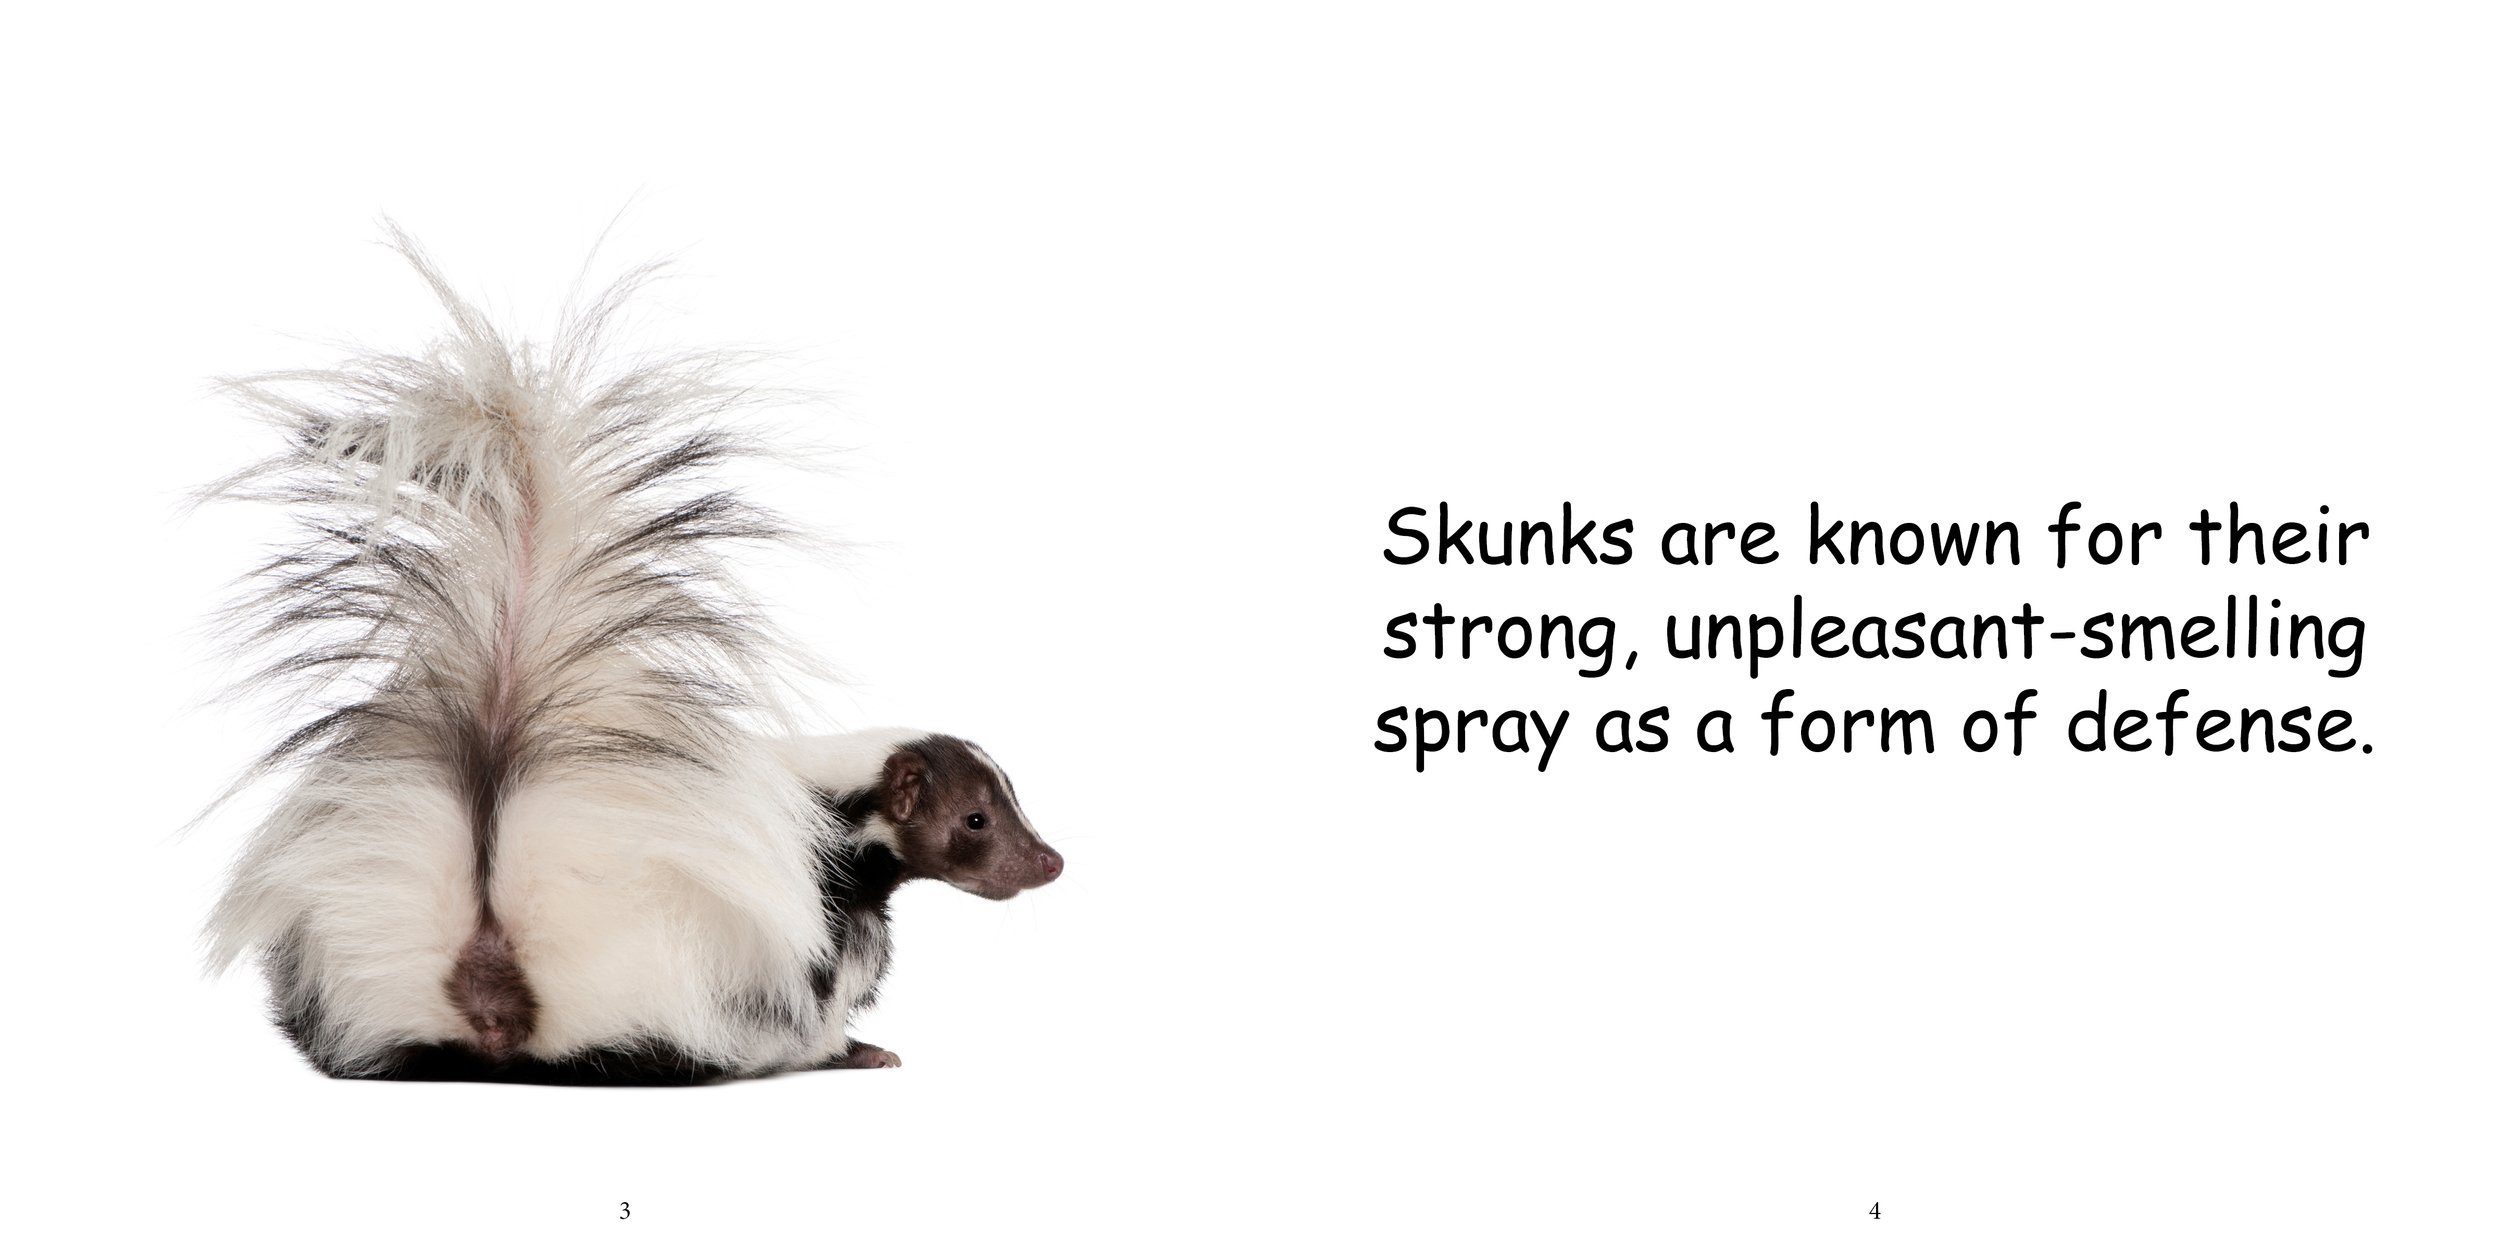 Everything about Skunks6.jpg